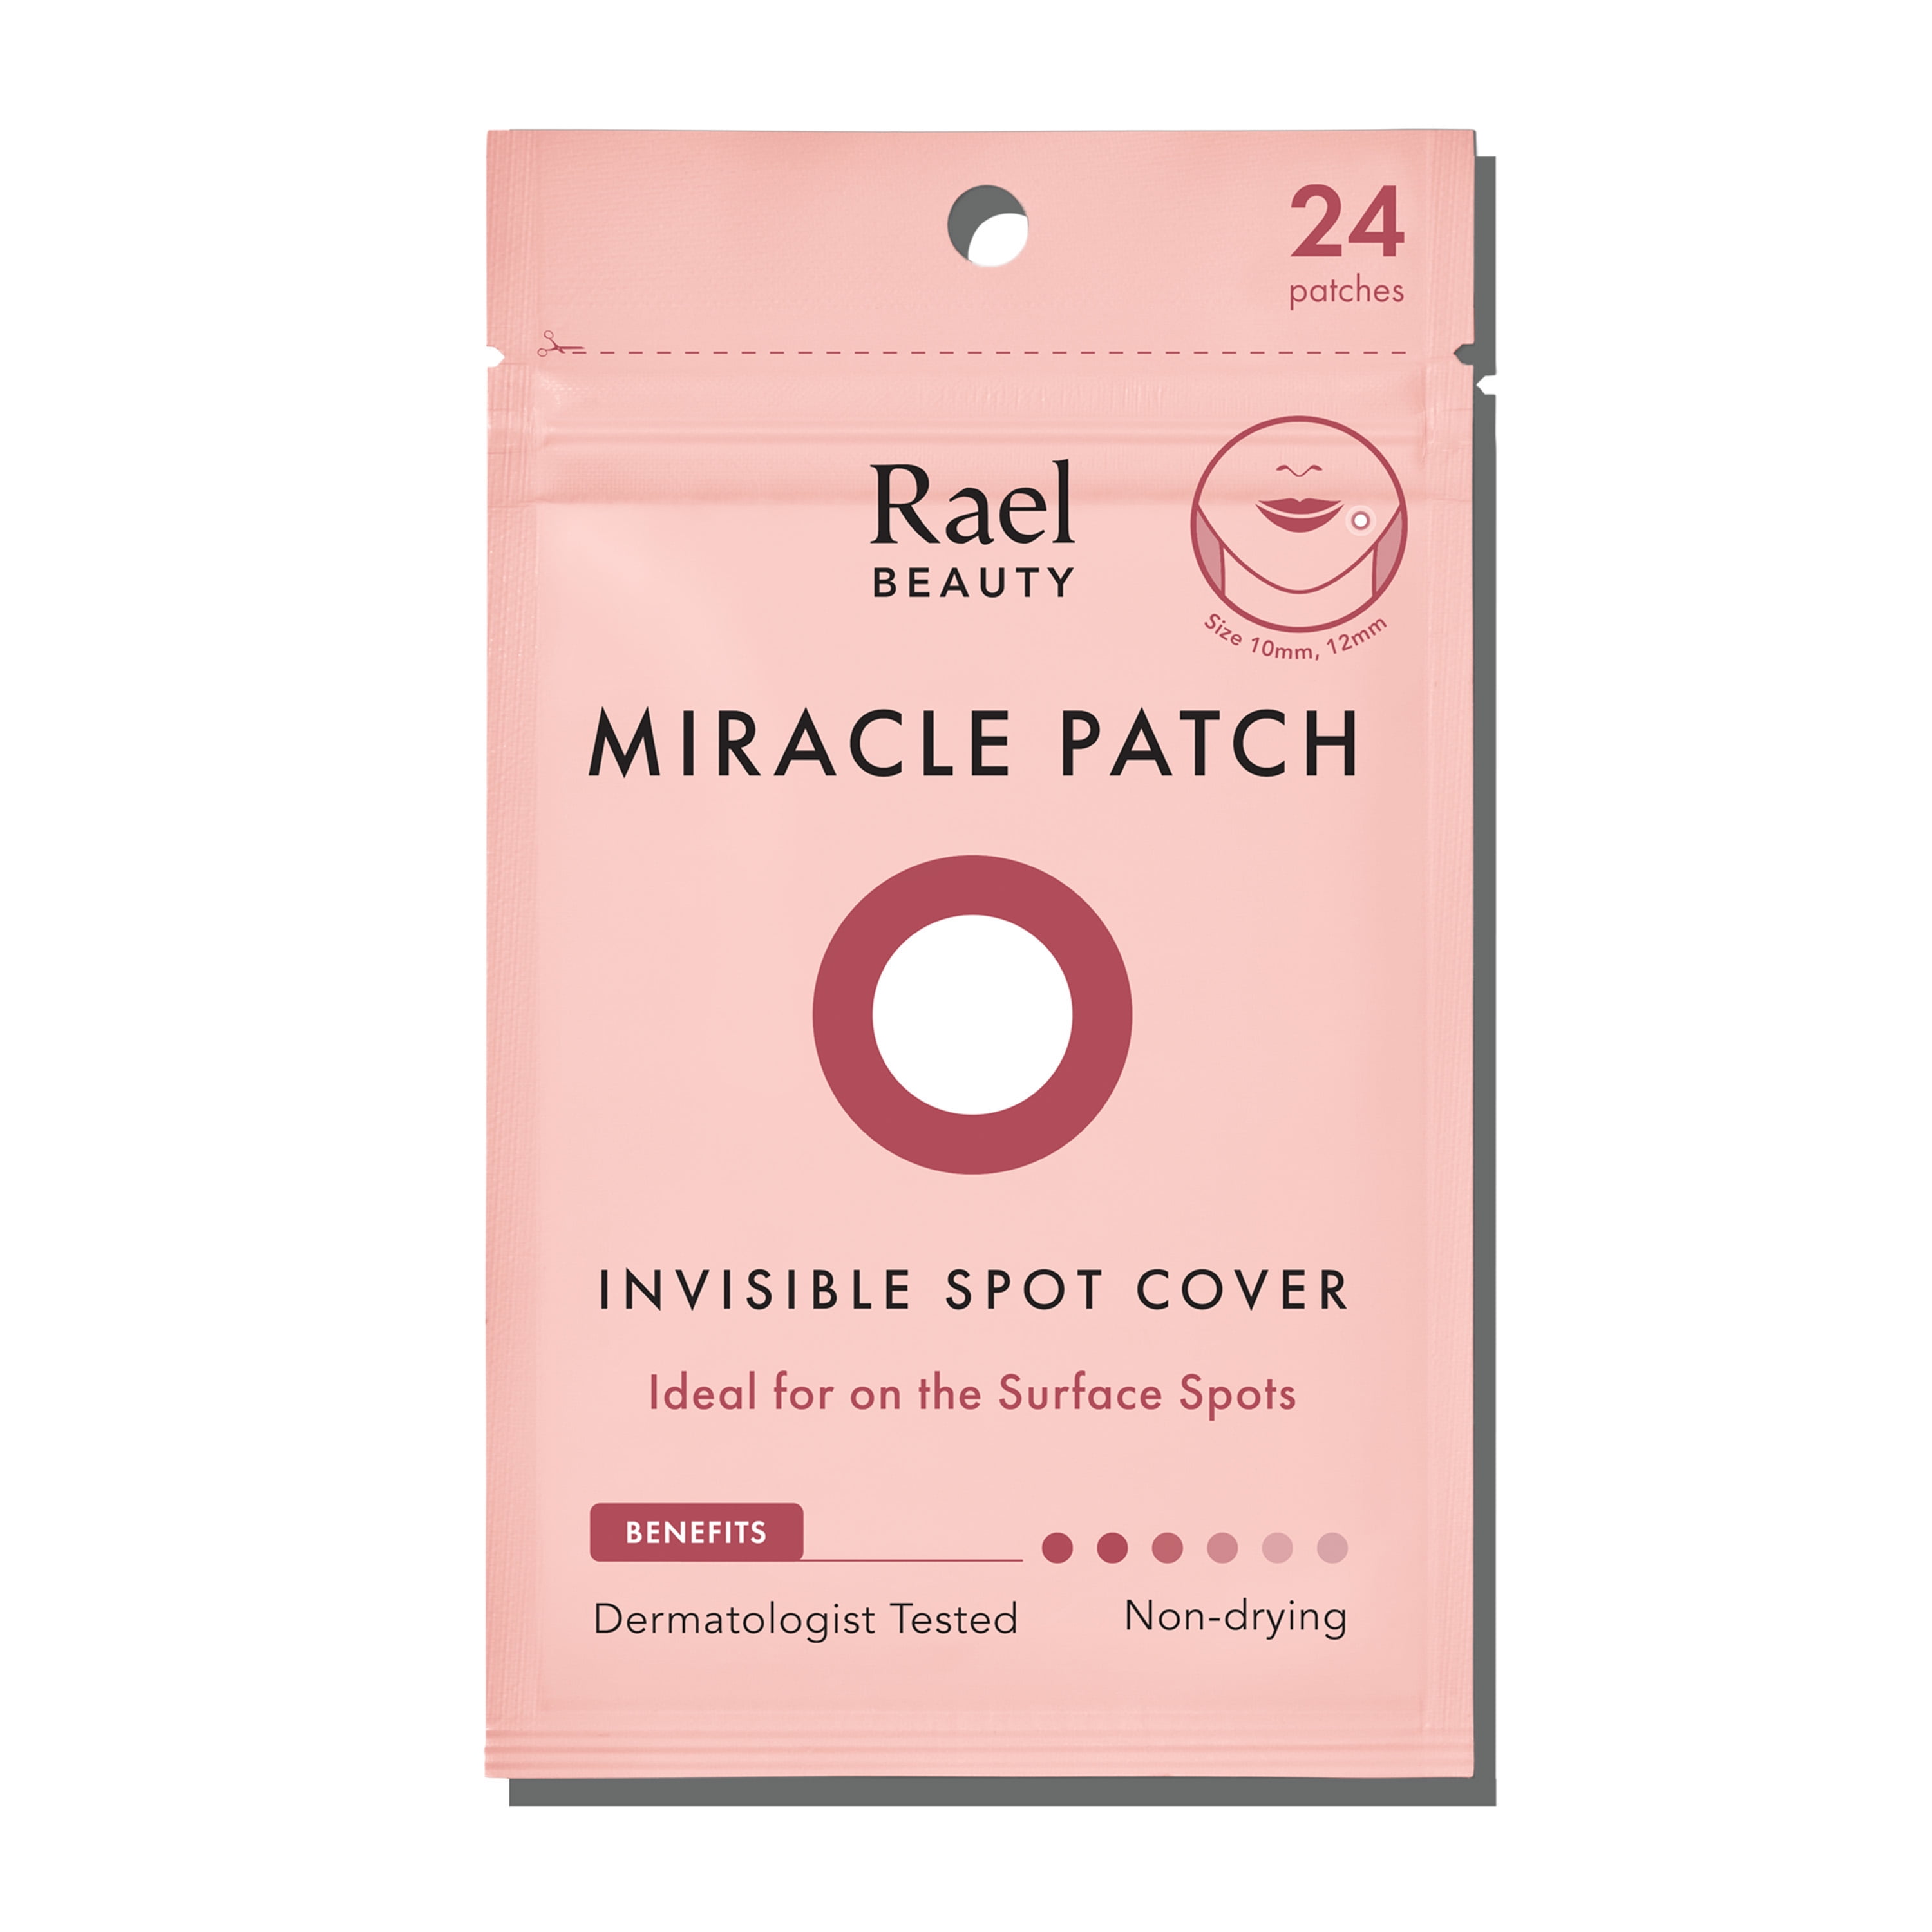 Rael Beauty Miracle Patch Invisible Acne Pimple Treatment, Spot Cover, 24 ct